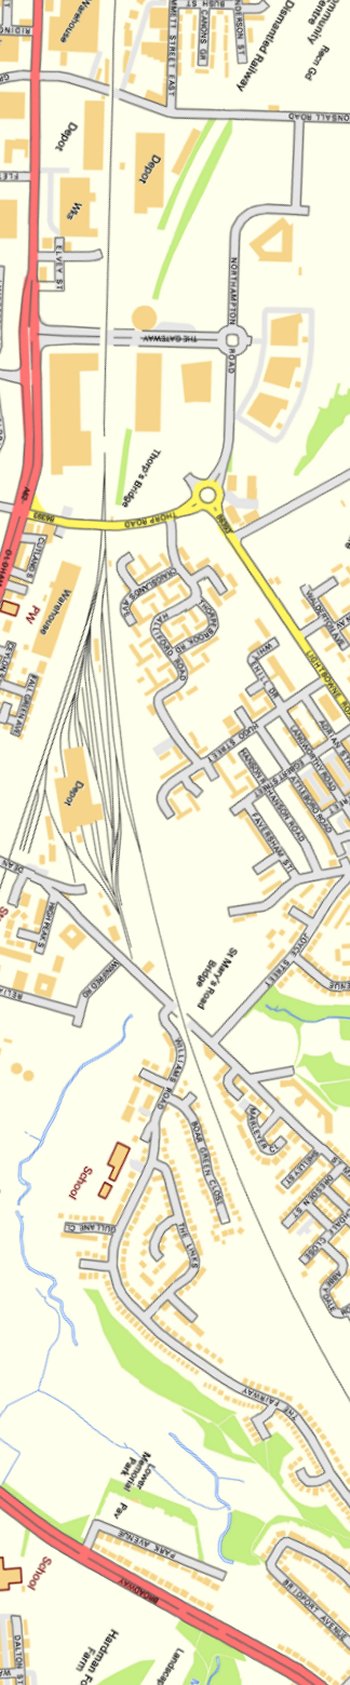 Section from Ordnance Survey OpenSource mapping 2013 showing the L&YR railway line in the vicinity of Newton Heath depot.